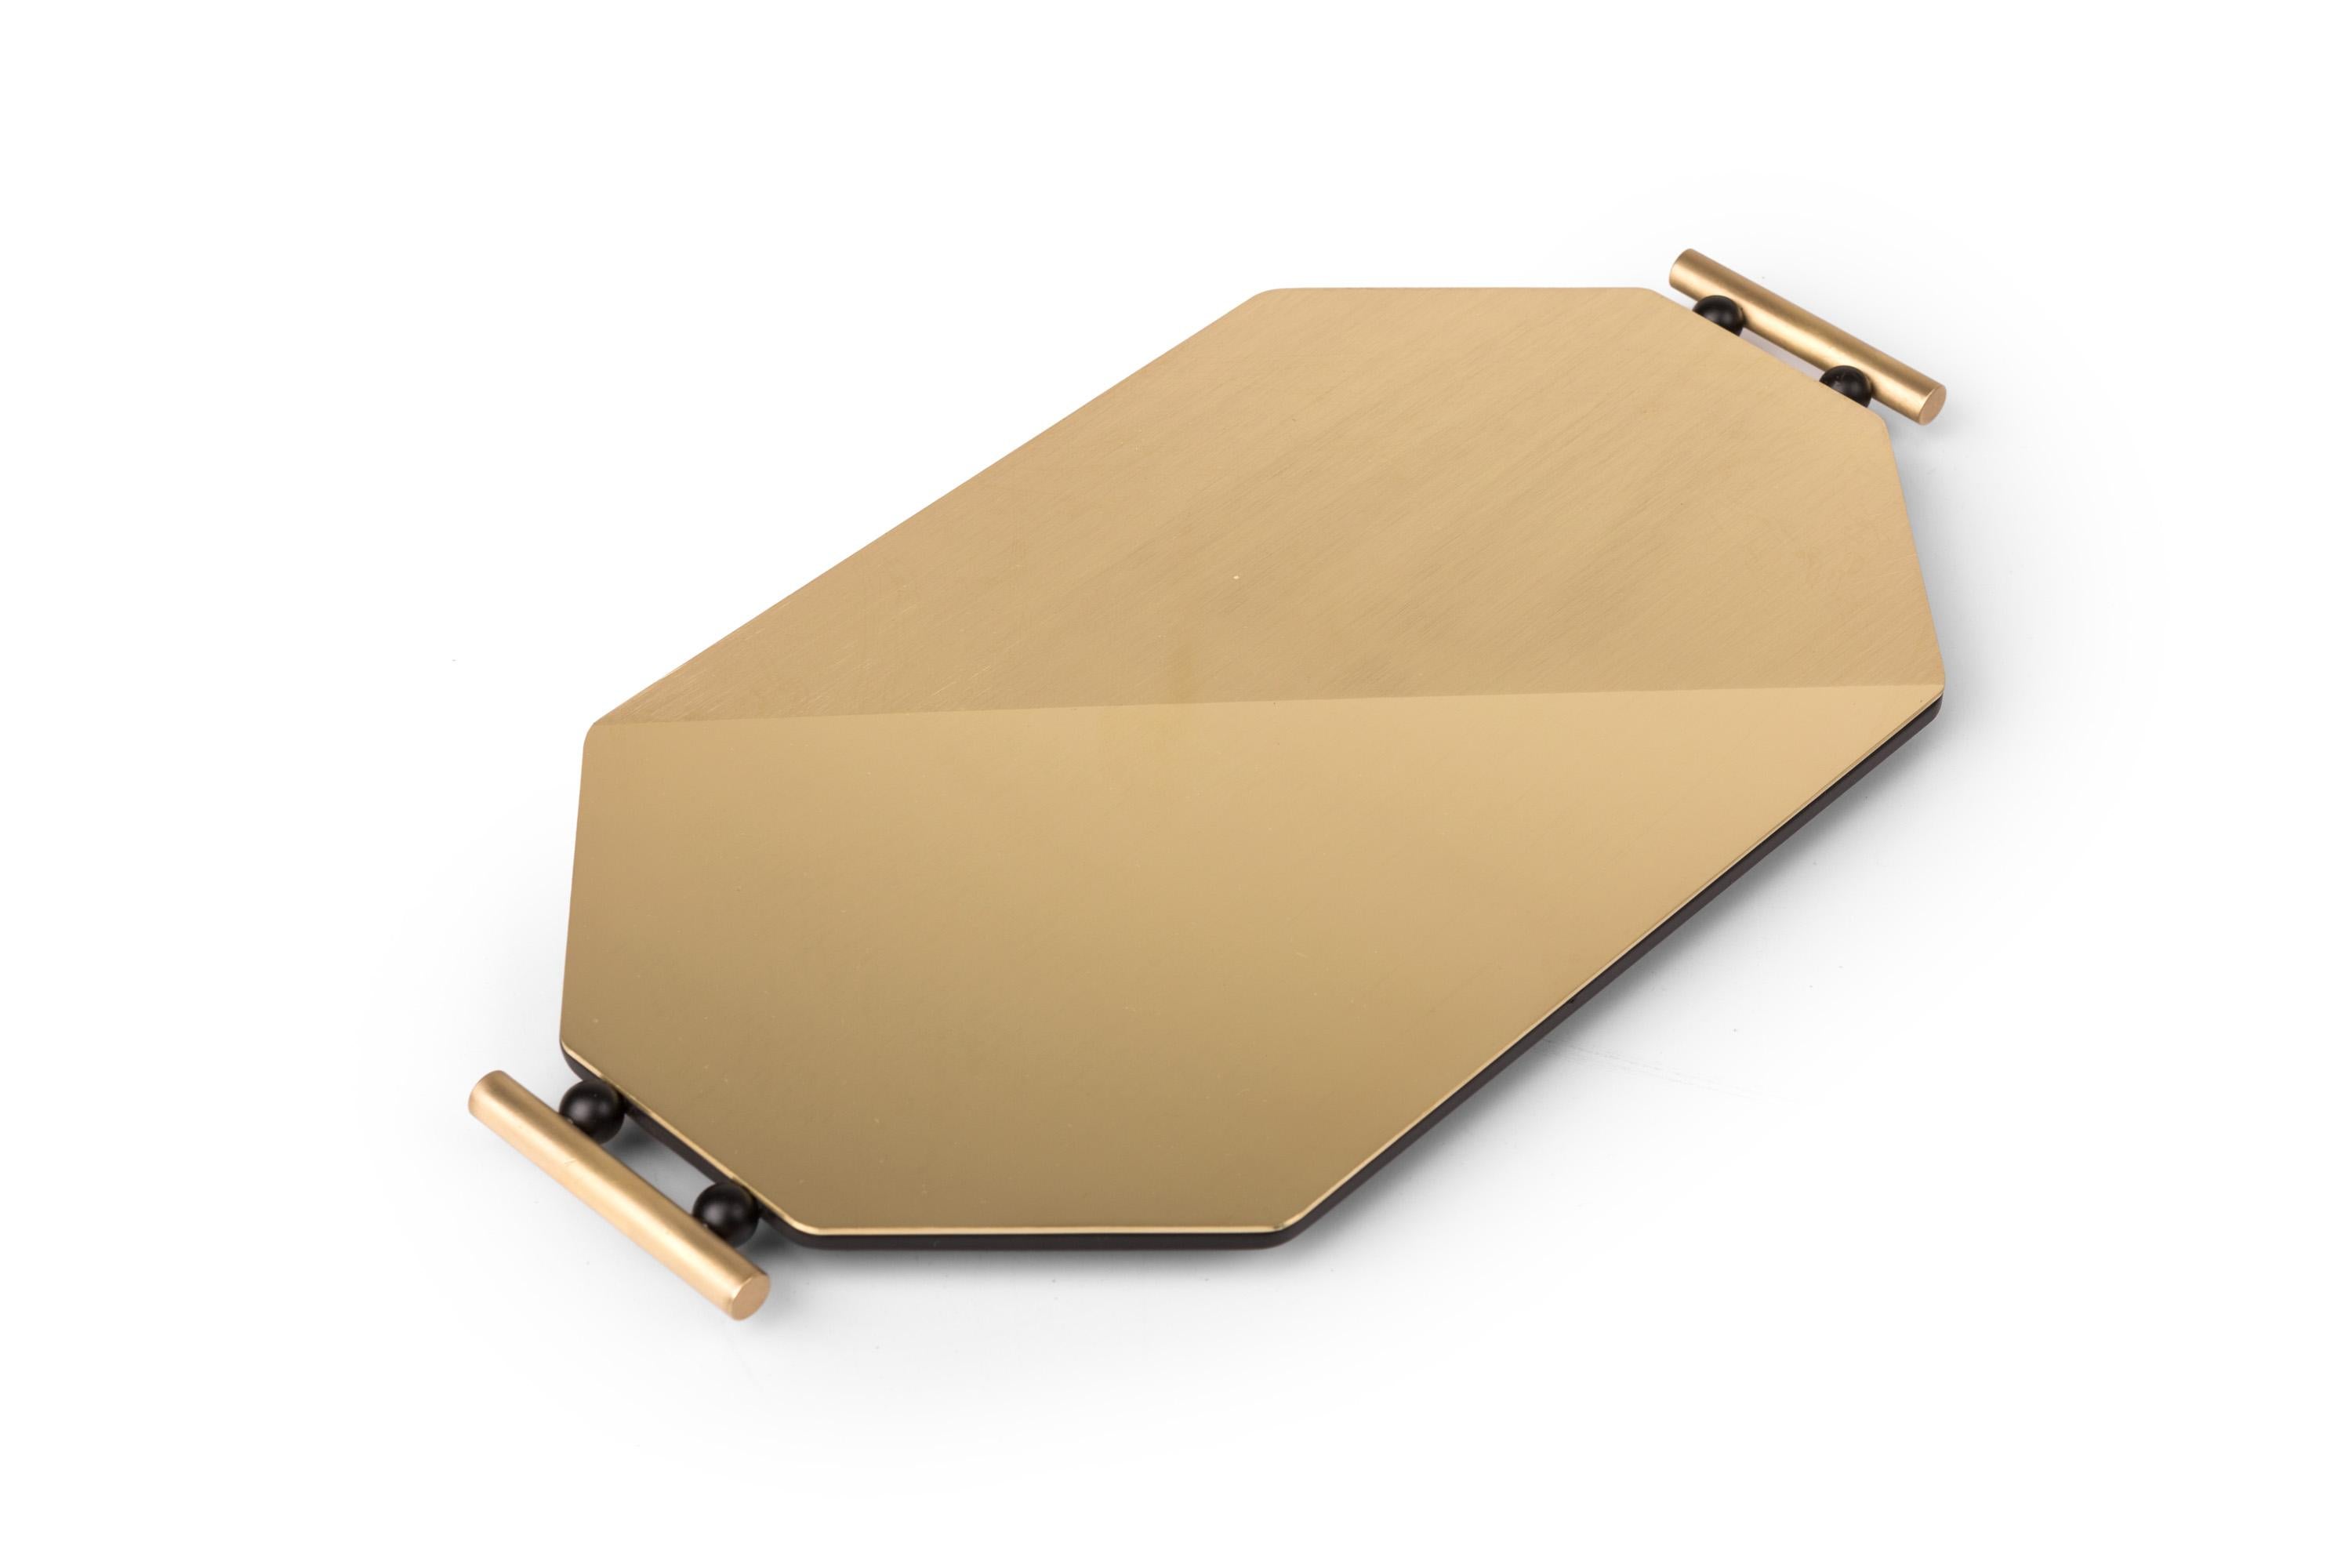 Satin tray Octagon by Mingardo
Dimensions: D35 x W18 x H2 cm 
Materials: Natural brushed and polished brass with a RAL 9005 varnished iron base
Weight: 3 kg

Also available in Different finishes: Natural brushed and polished brass or
copper